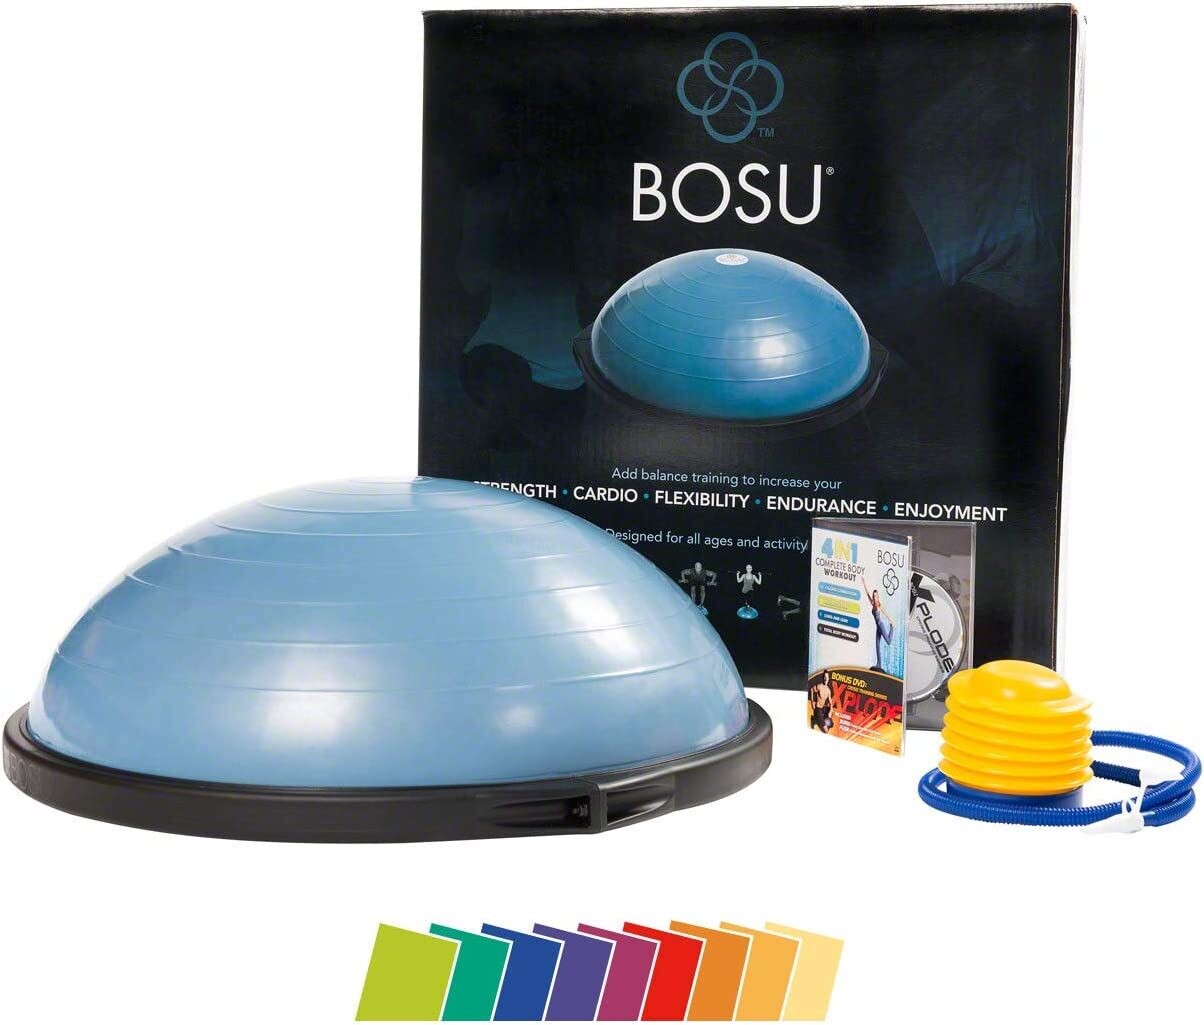 Versatile BOSU Ball Home Fitness Exercise Gym Trainer - Blue Ball with Black ABS Base and Tubes QJ-BALL012